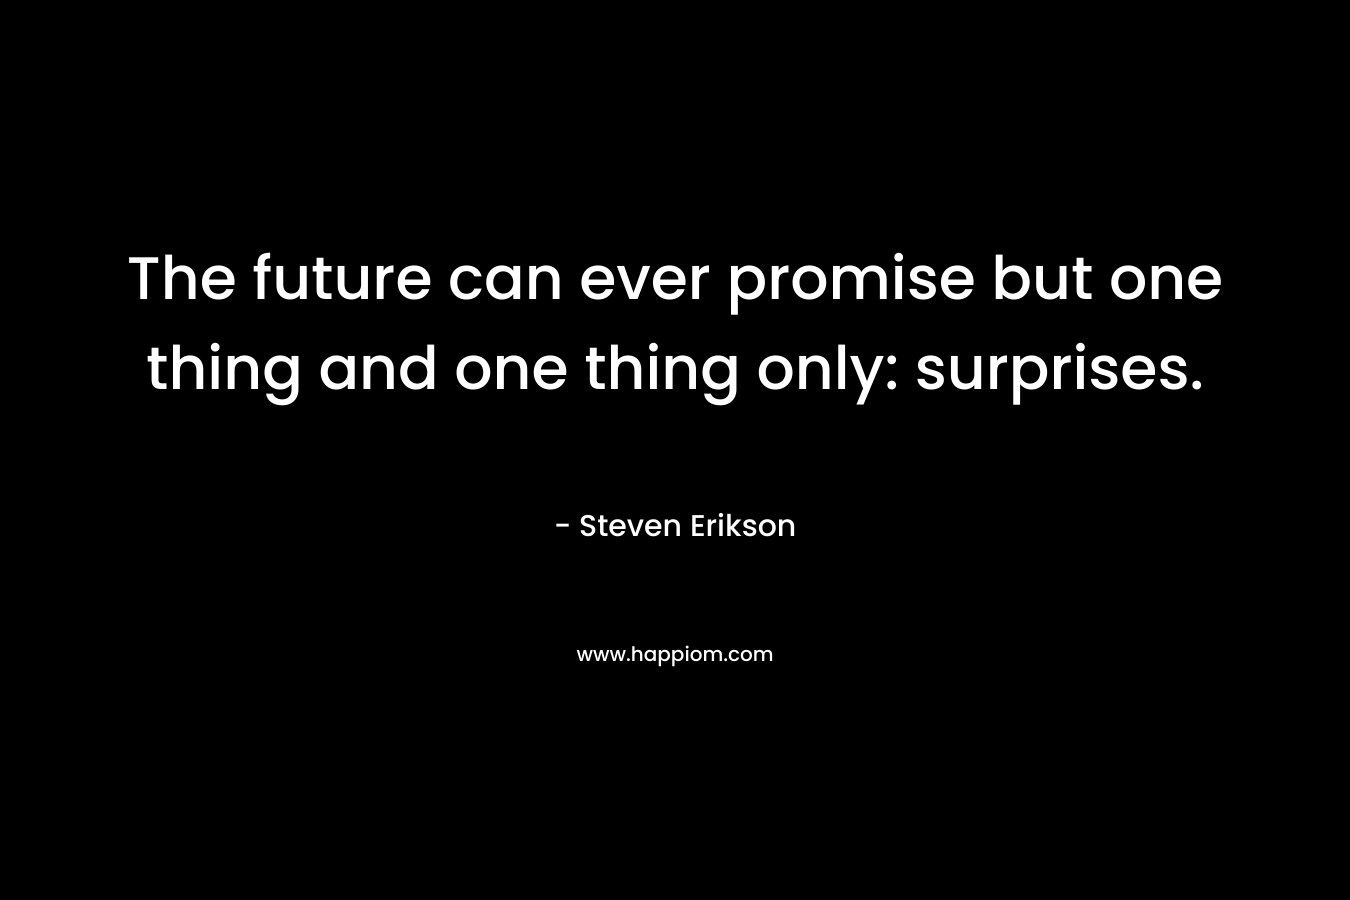 The future can ever promise but one thing and one thing only: surprises. – Steven Erikson